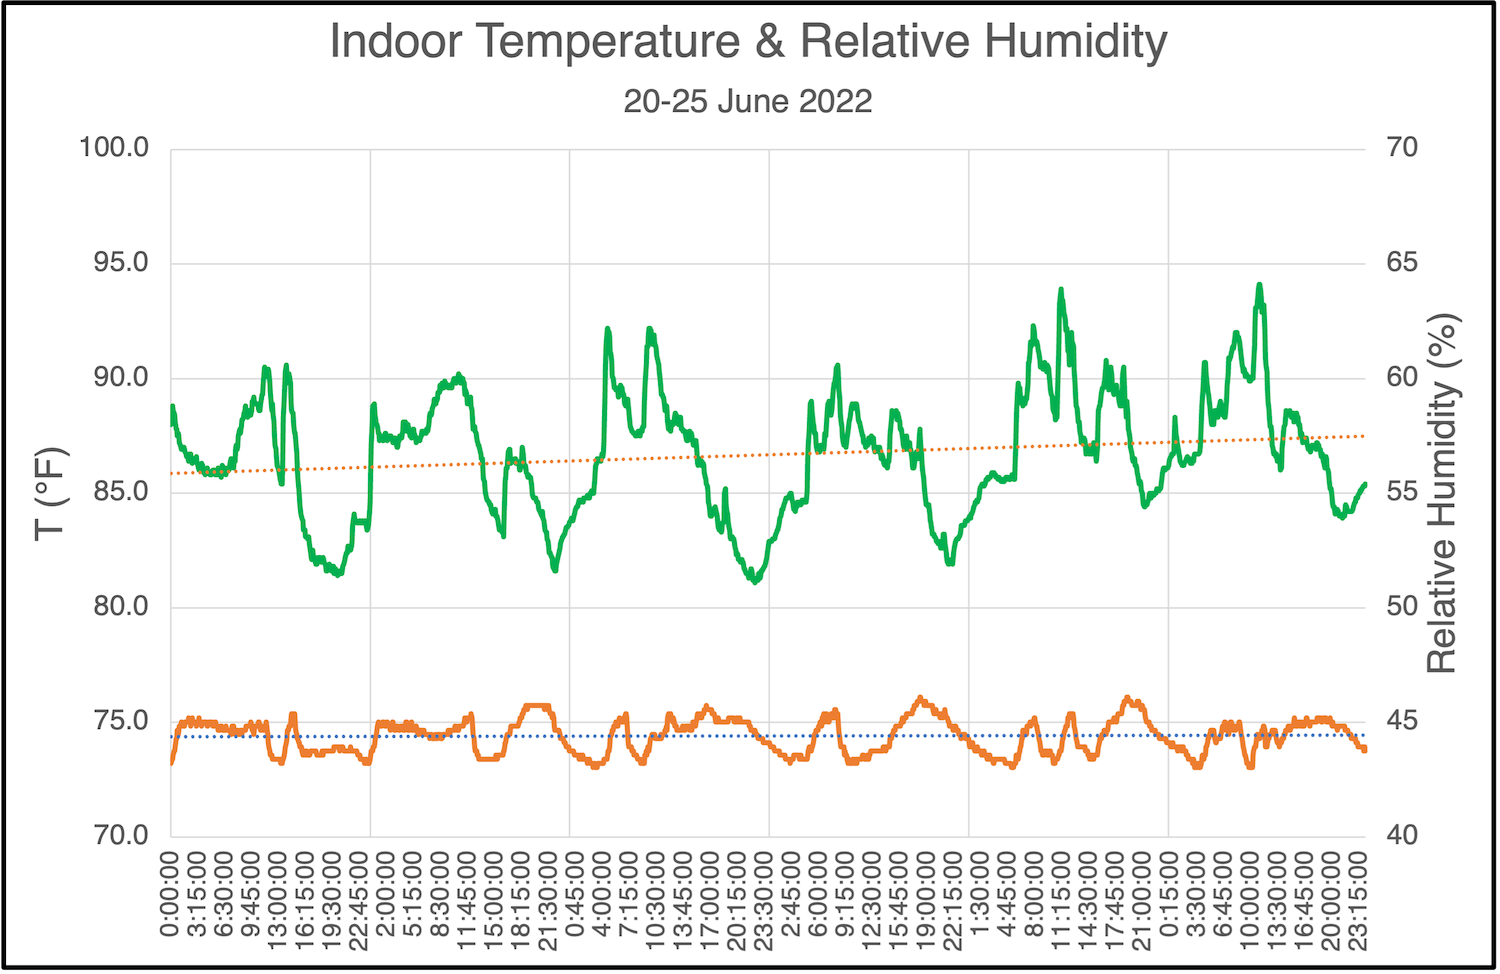 Indoor temperature and relative humidity during a heat wave